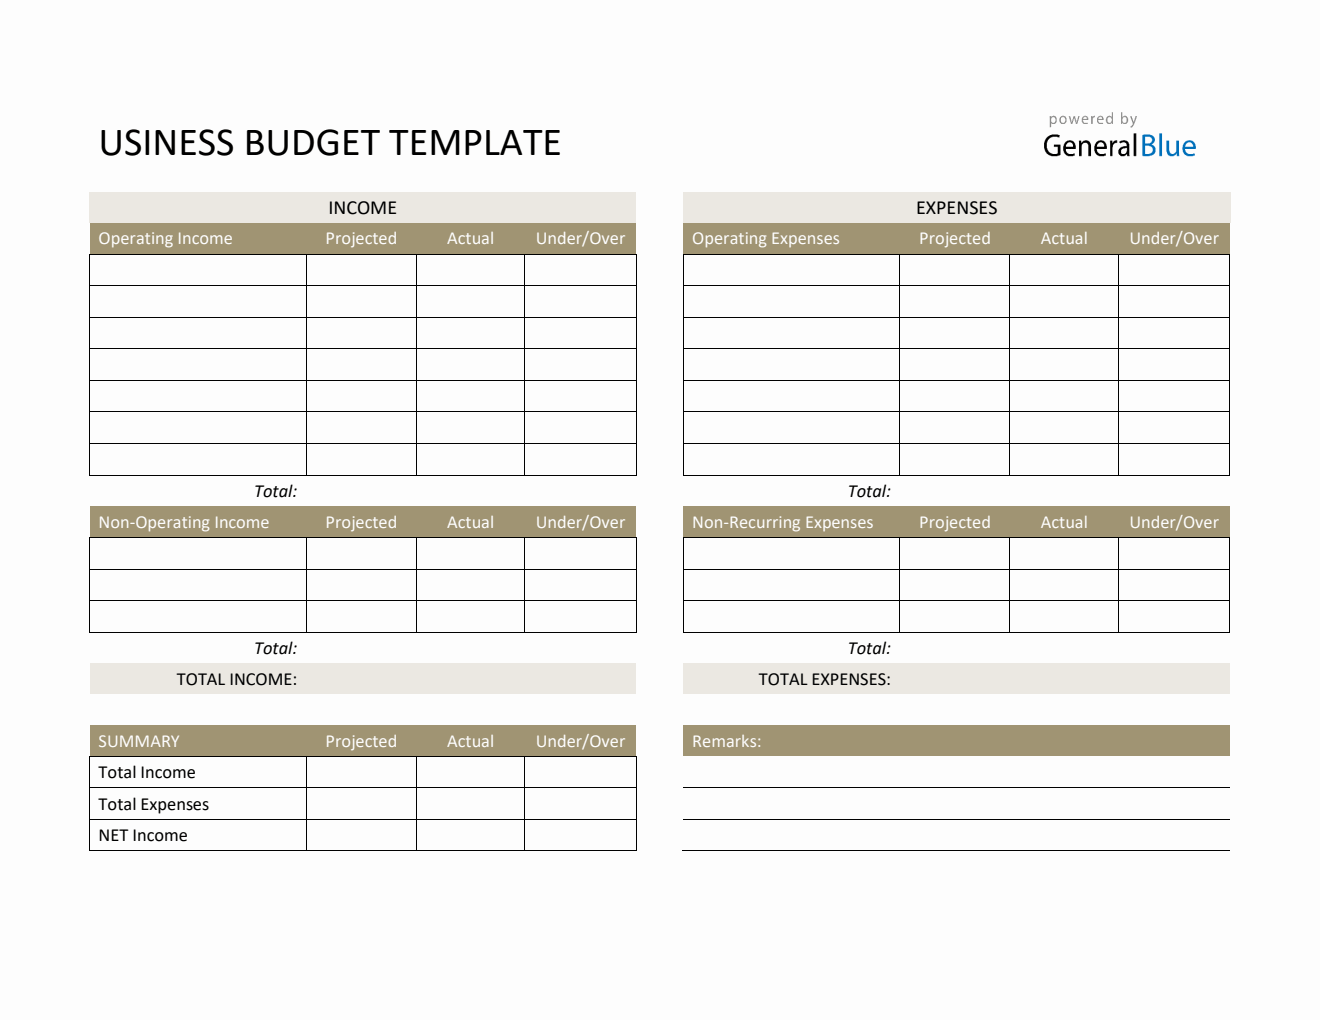 Printable Business Budget Template in PDF (Basic)